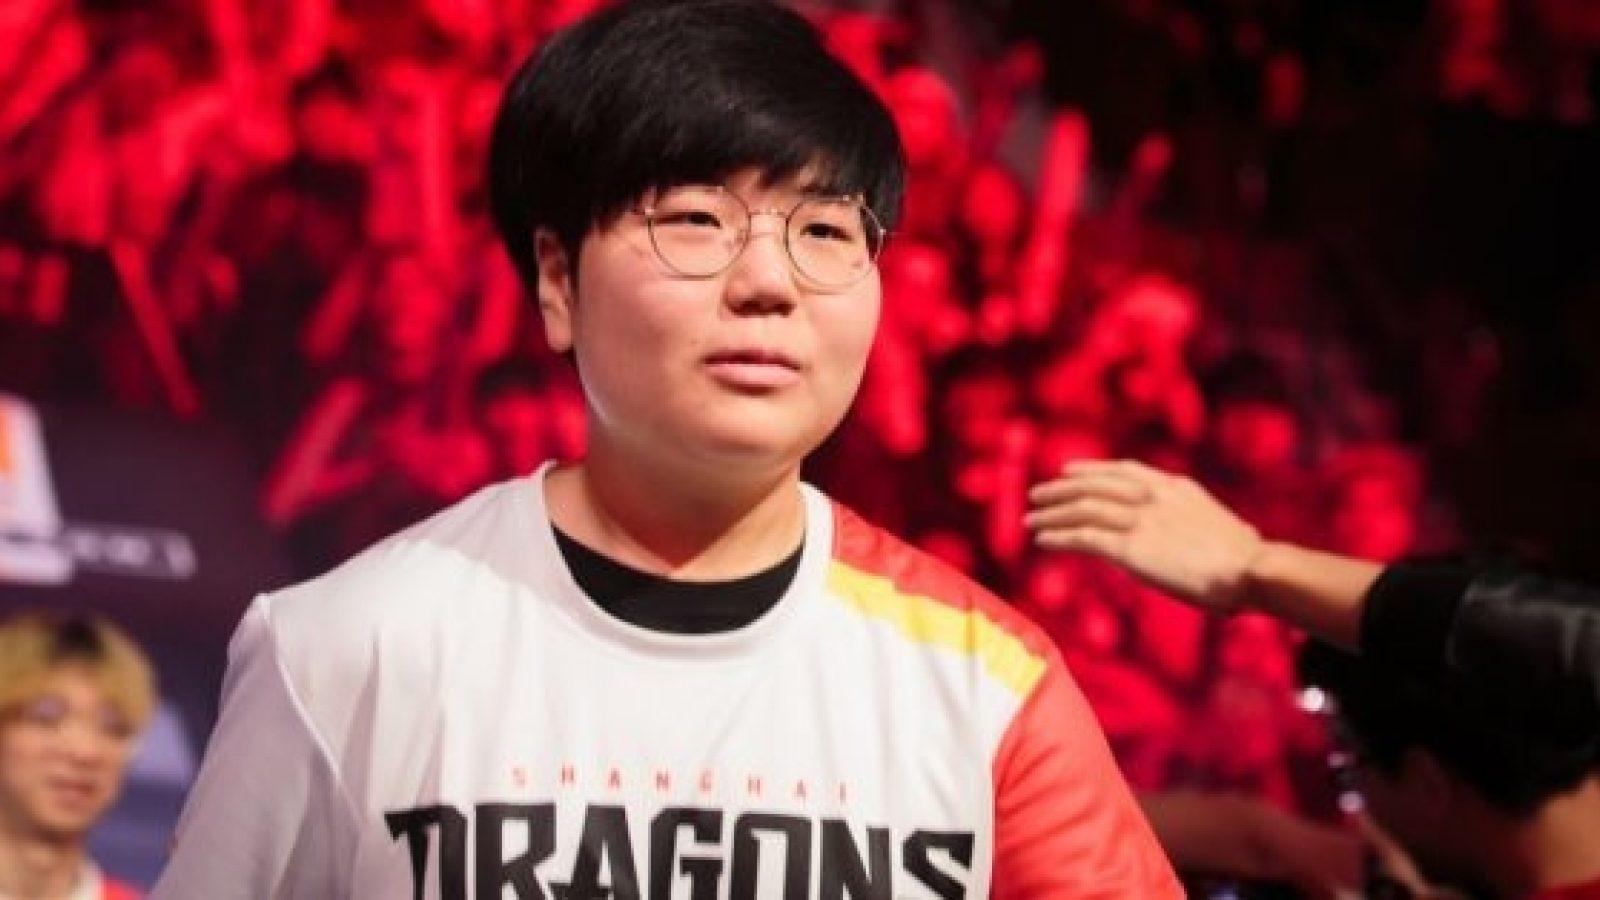 Geguri enters the Blizzard Arena as part of the Dragons roster